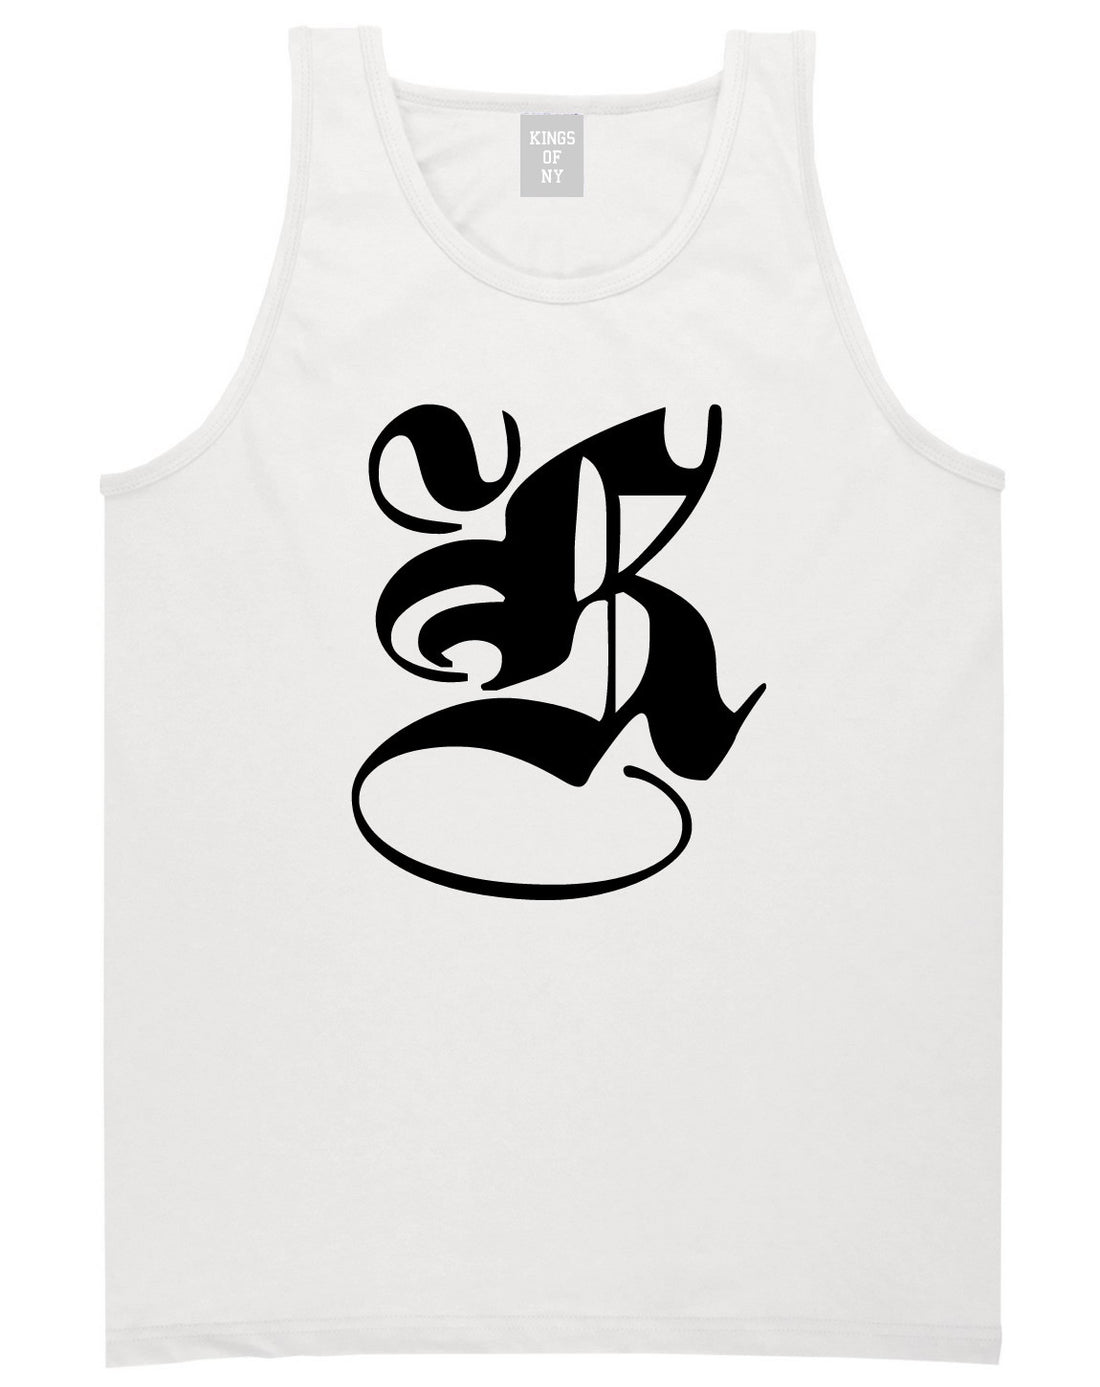 Kings Of NY K Gothic Style Tank Top in White